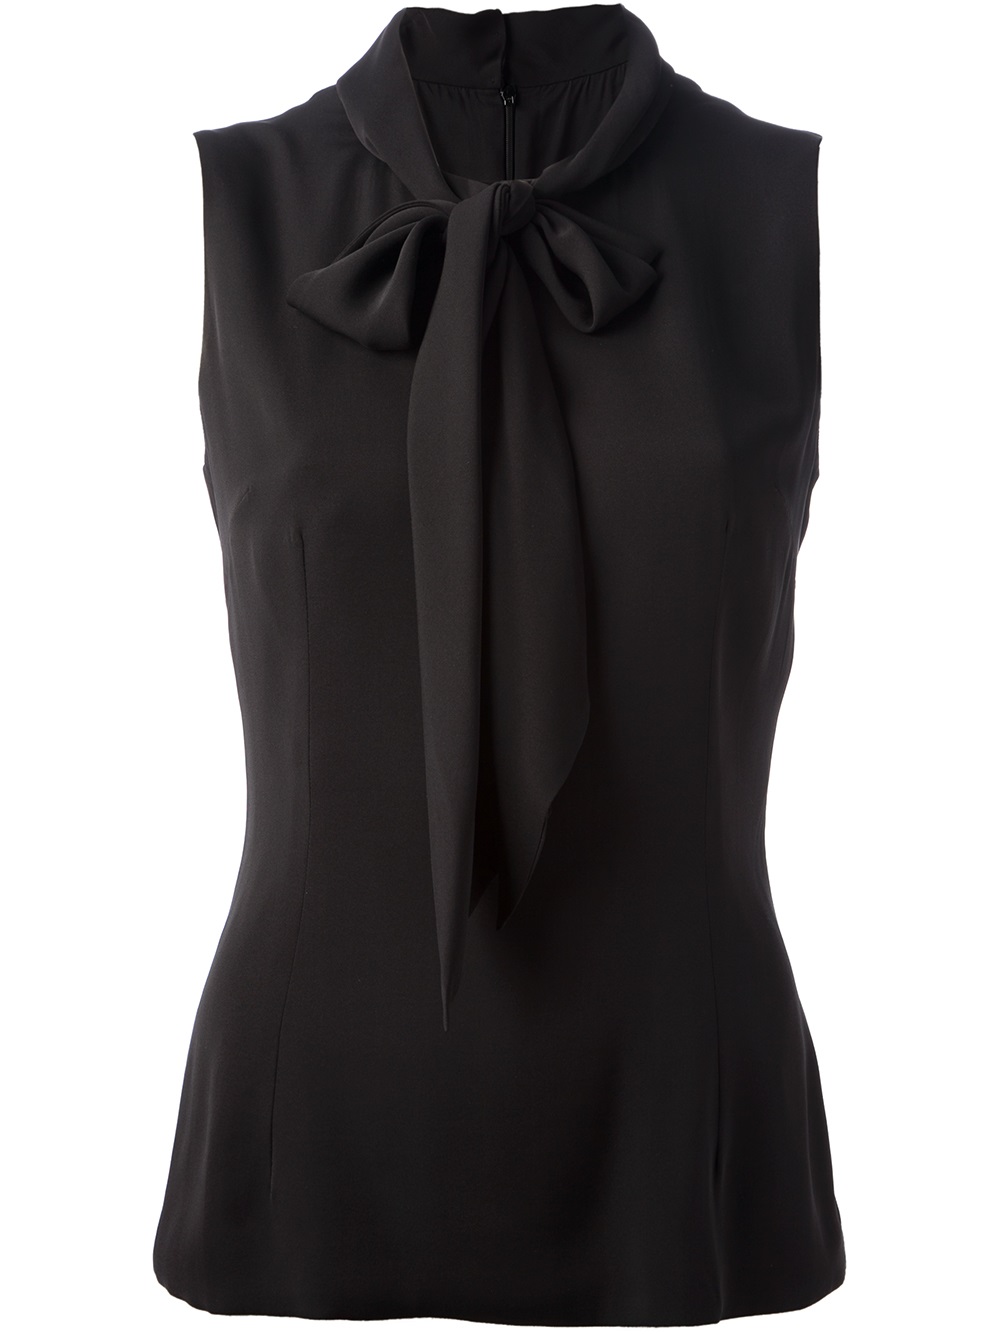 Lyst - Dolce & Gabbana Pussy Bow Sleeveless Blouse in Black